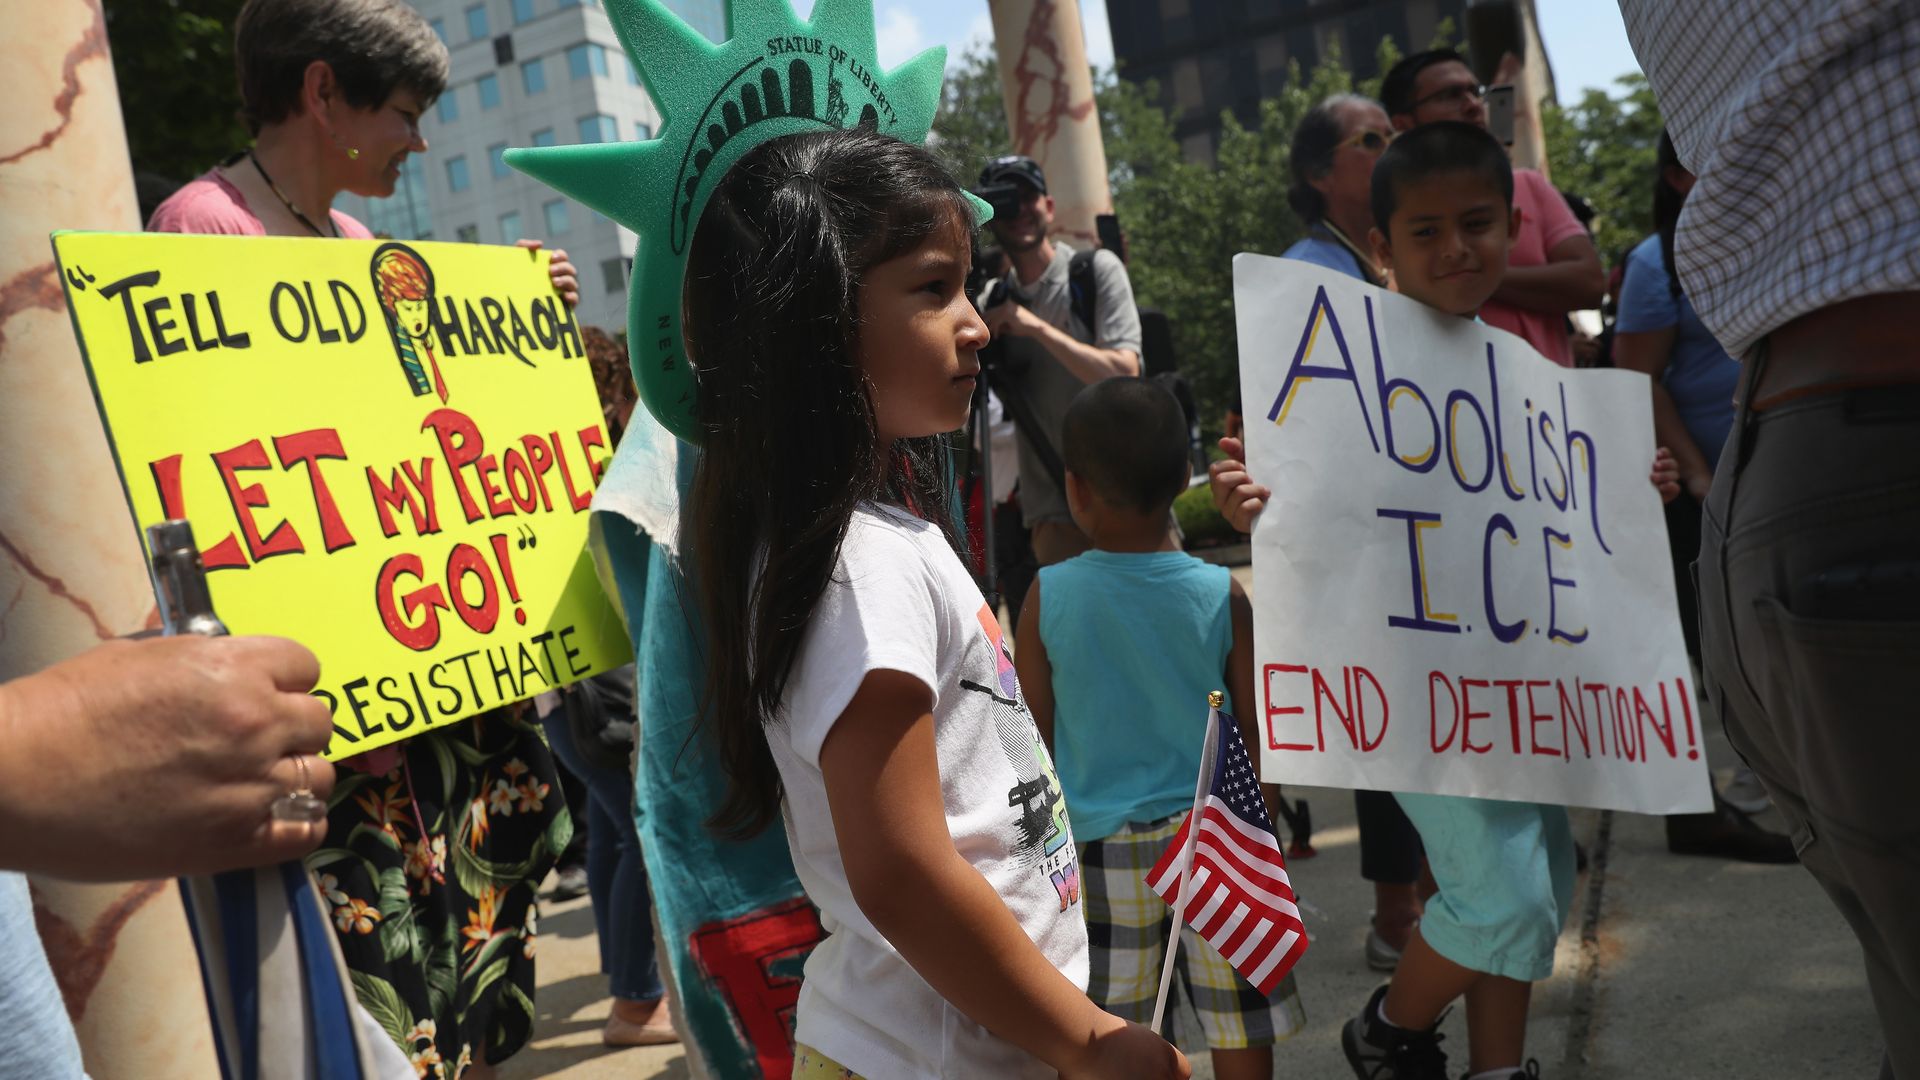 Children protesting with signs that say "abolish ICE"